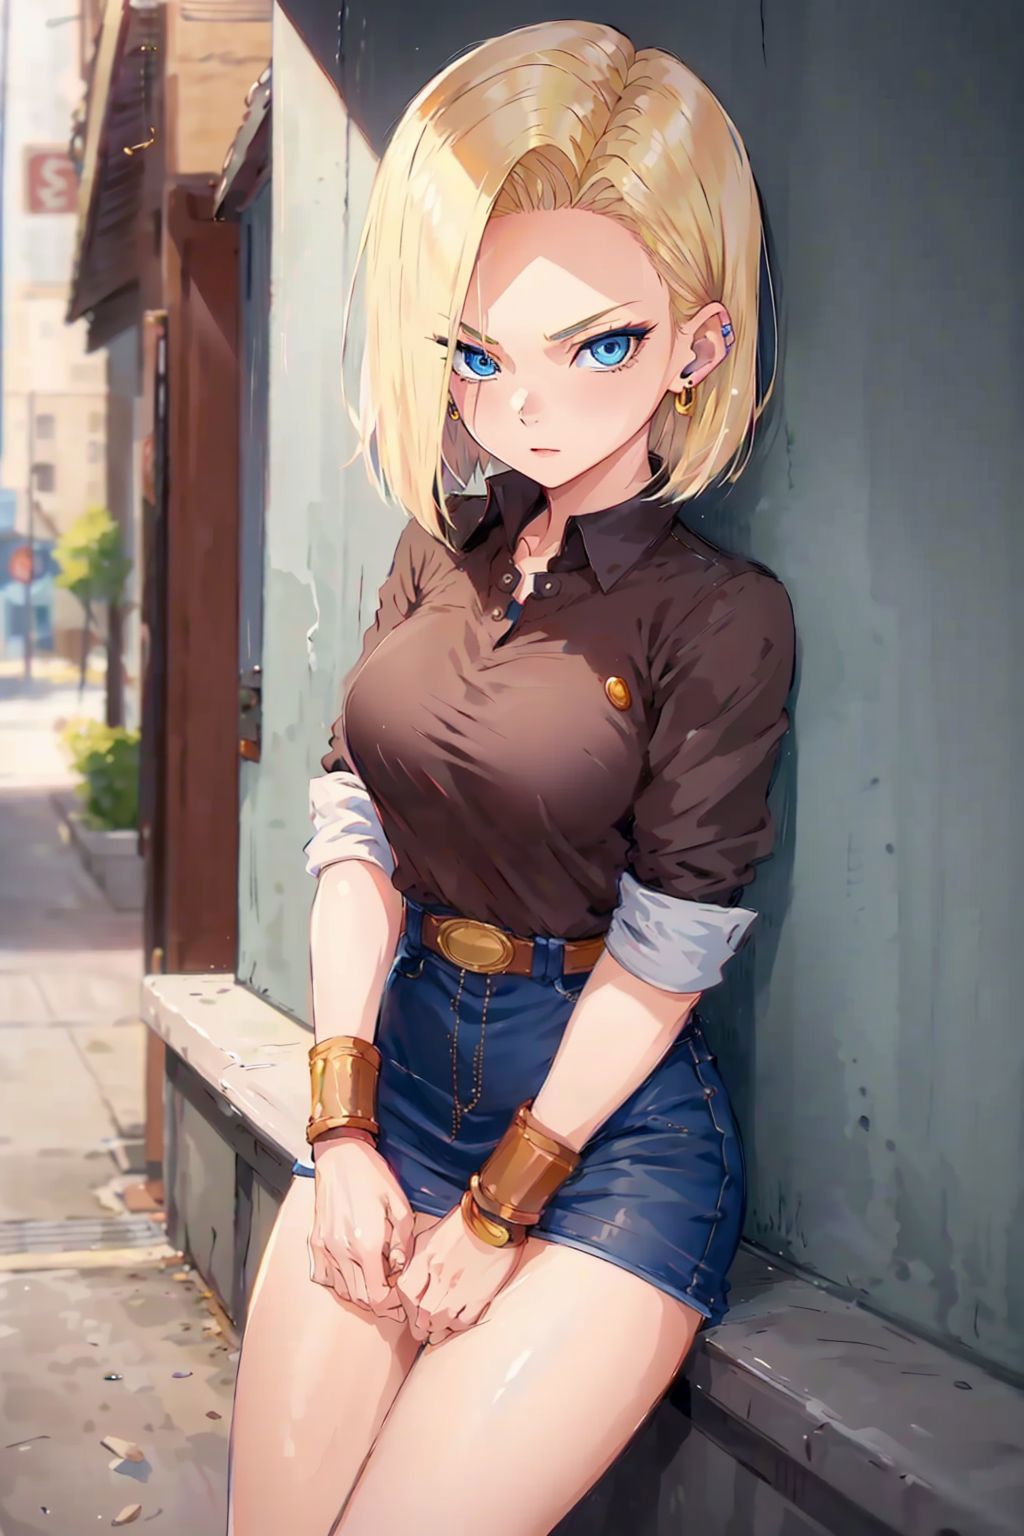 Android 18 人造人間18号 / Dragon Ball Z image by milk518